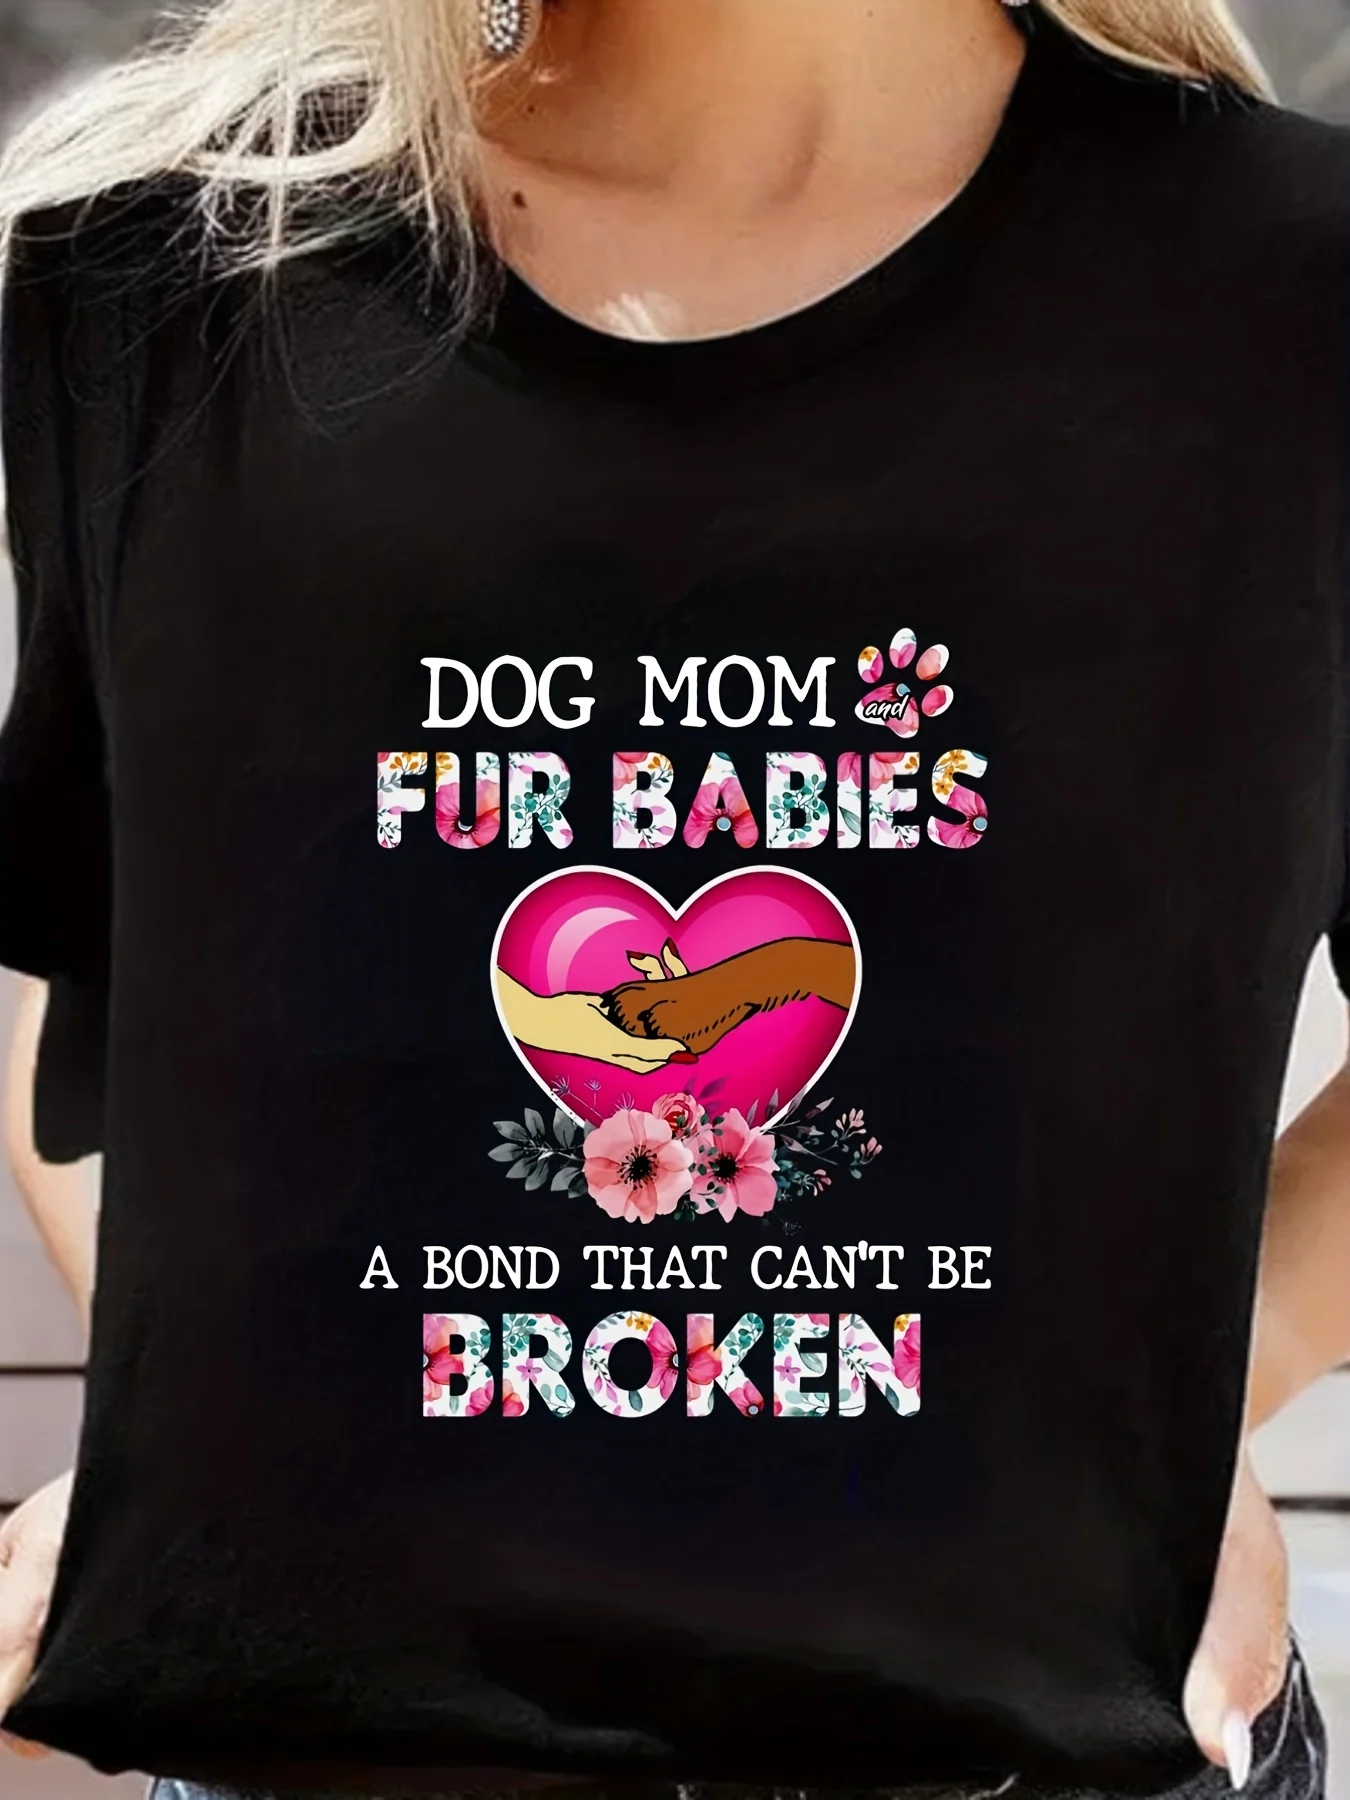 

Dog Mom Letter Print Tee For Women - Round Neck Casual Sports T-shirt - Women's Athleisure Top for Dog Lovers